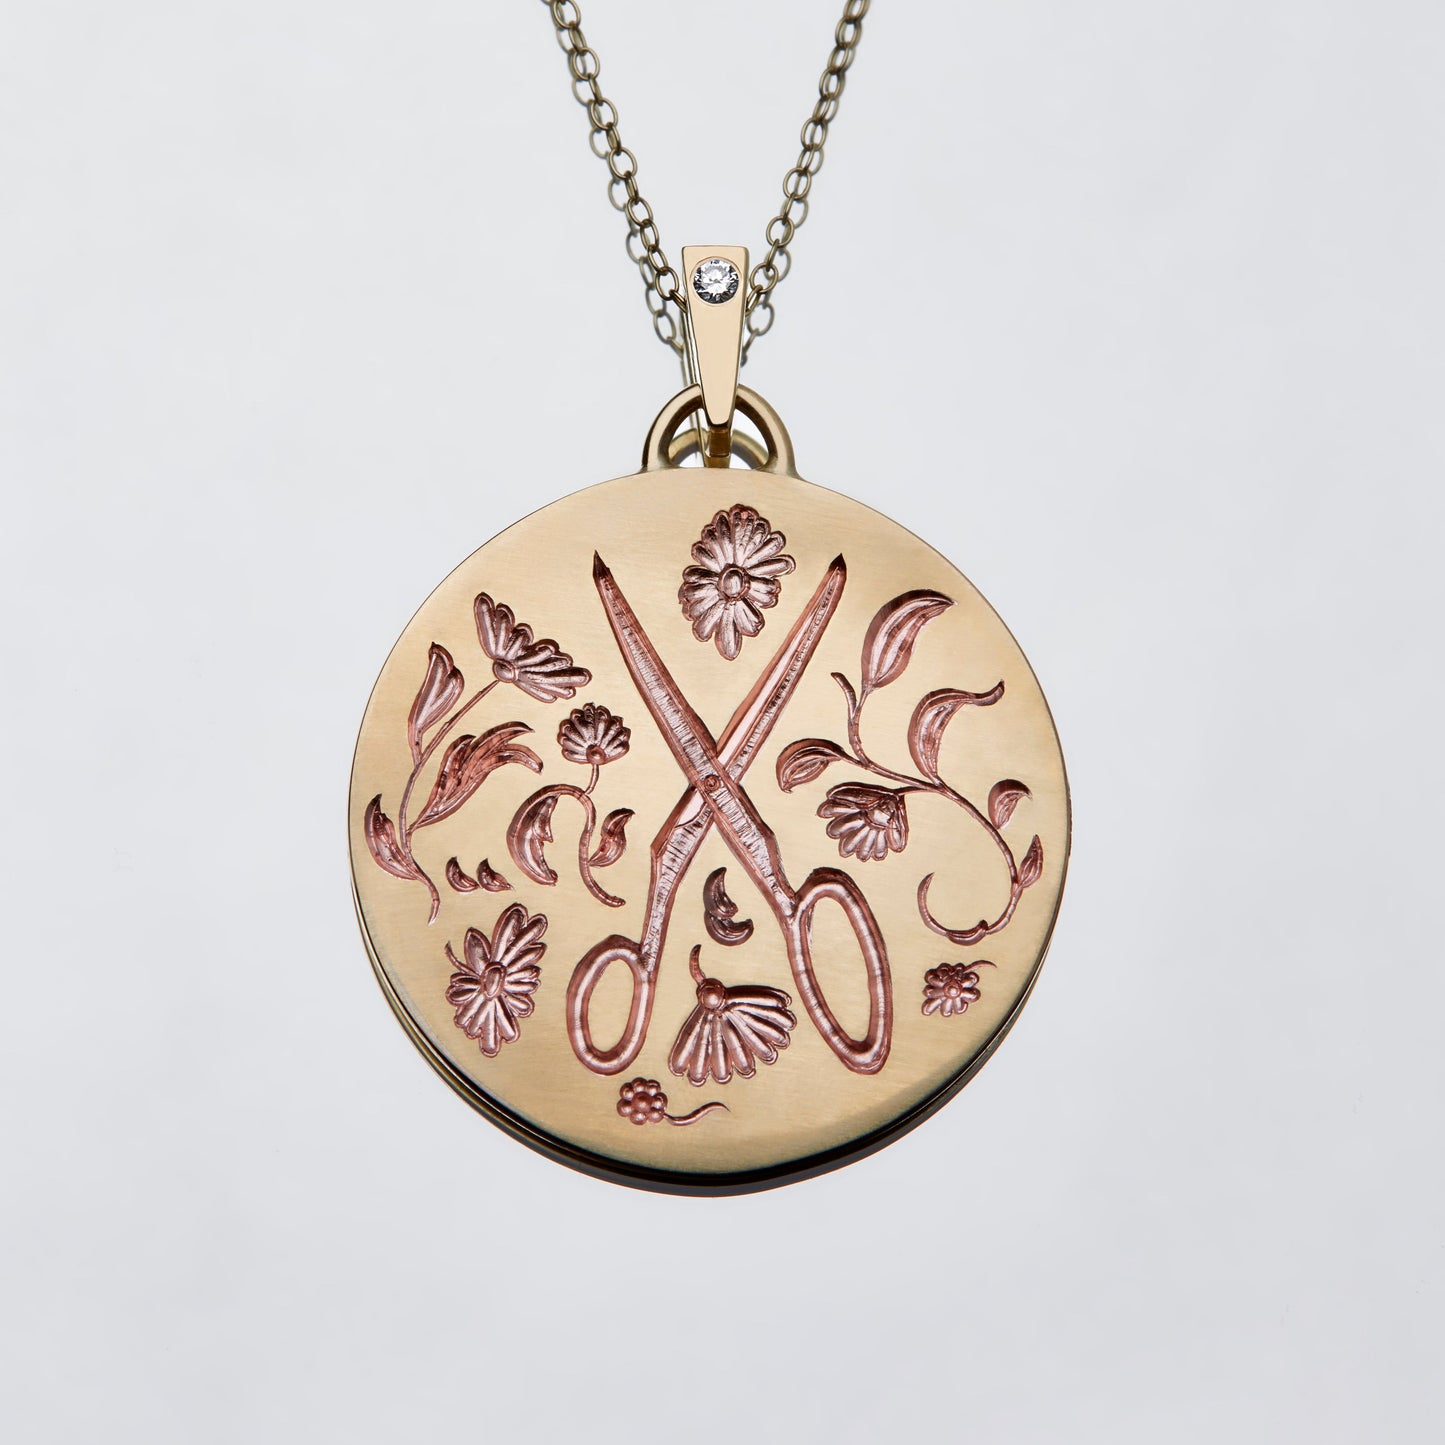 Castro Smith Jewelry Gold Frieda Pendant with Scissors, Flowers and Pearlescent Pink Engravings.